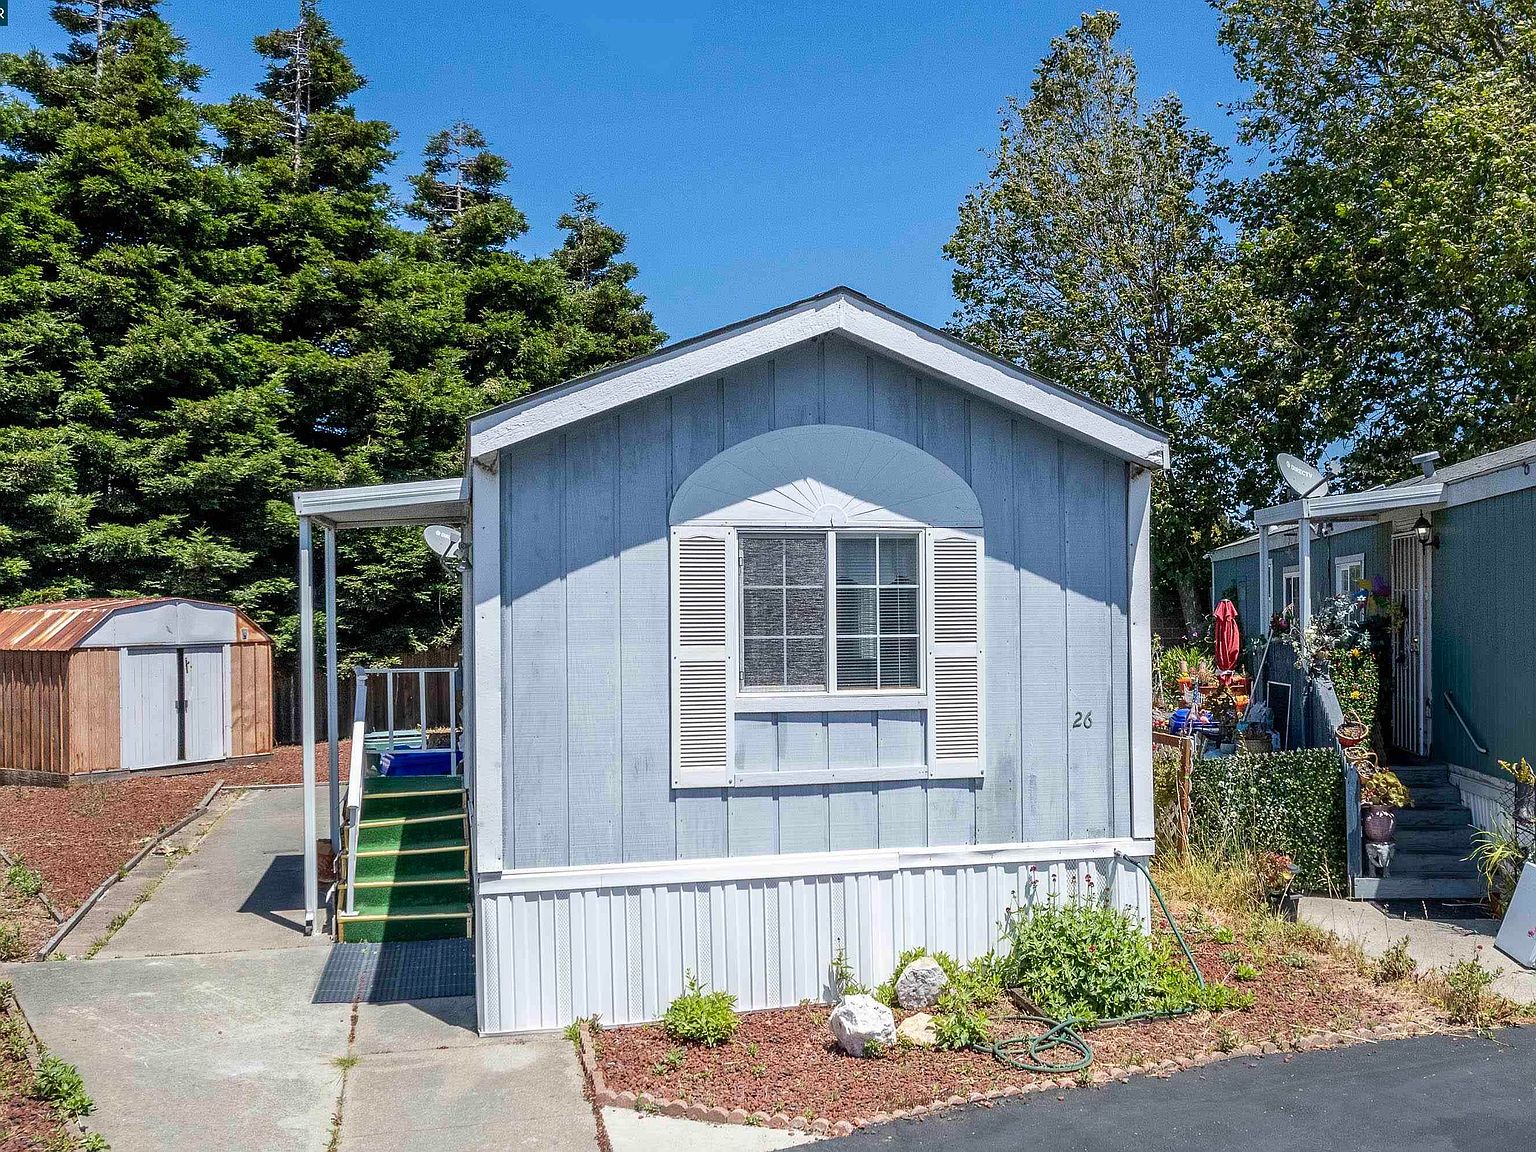 2885 Willow Rd TRAILER 26, San Pablo, CA 94806 | Zillow